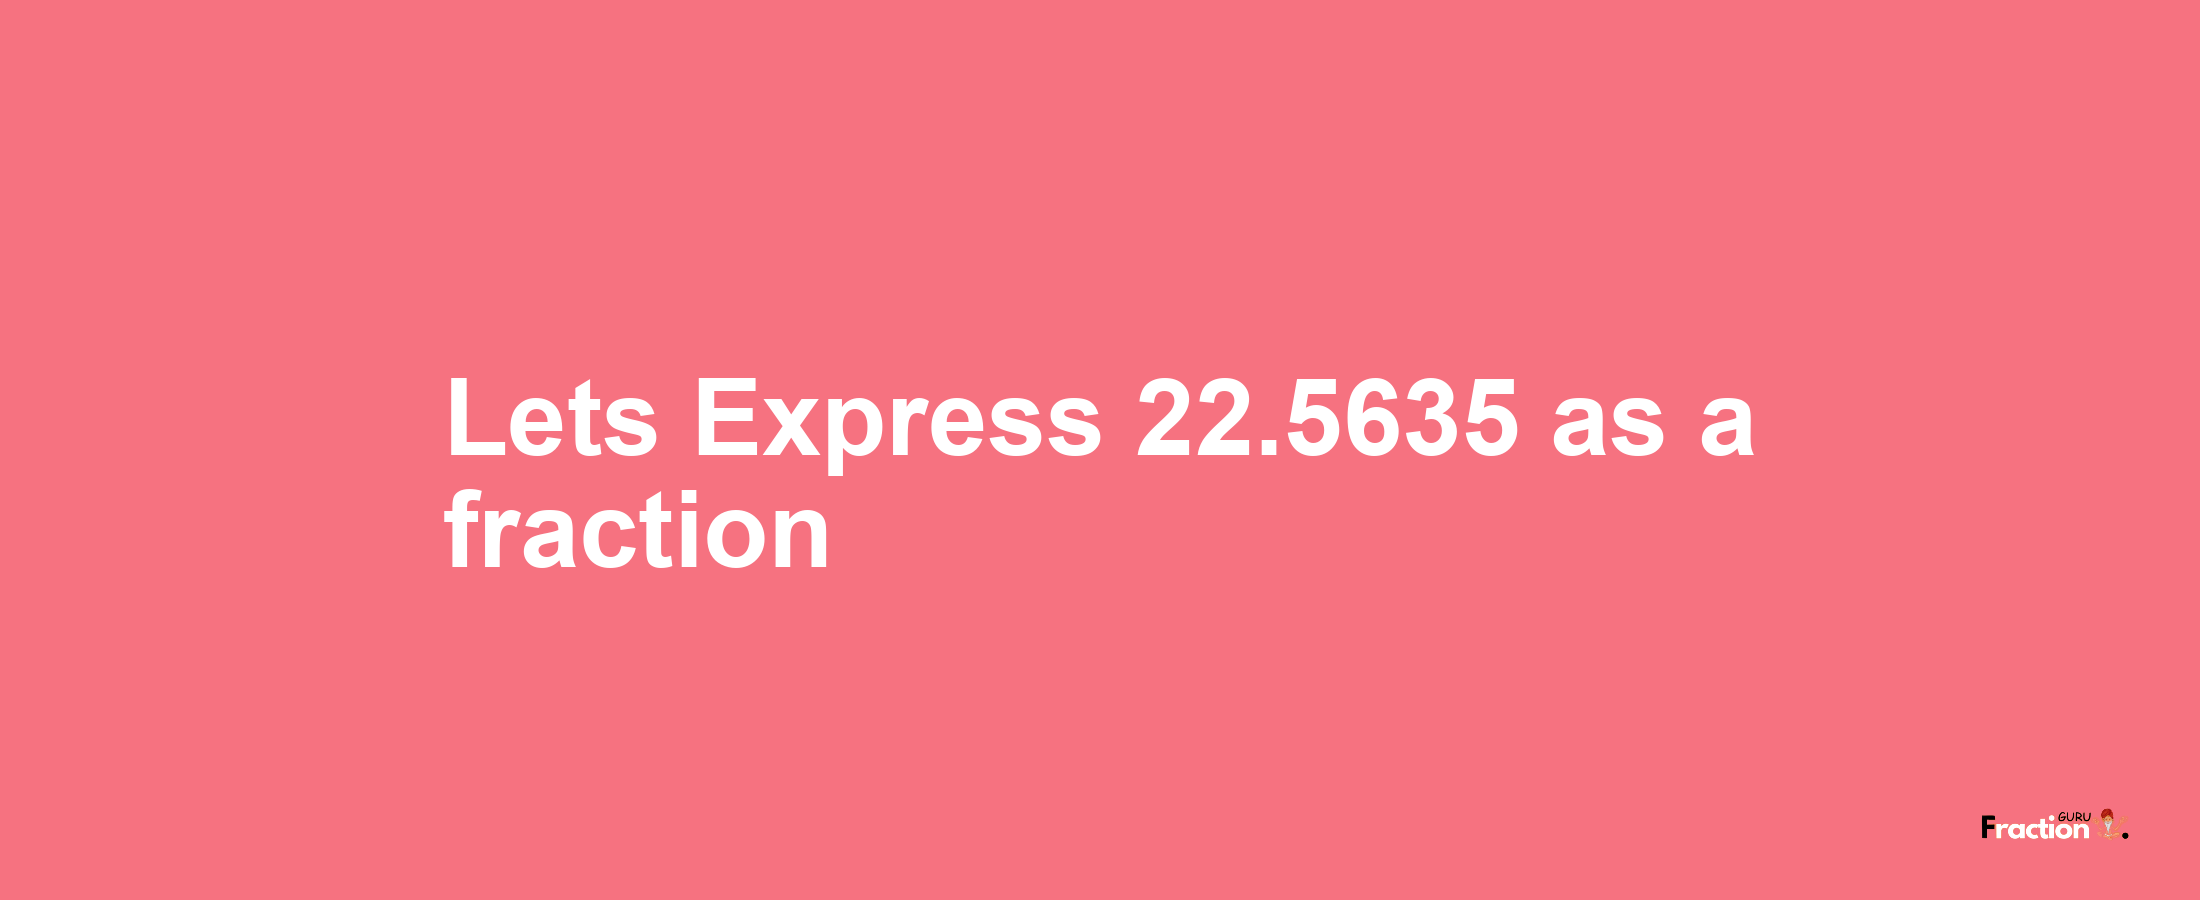 Lets Express 22.5635 as afraction